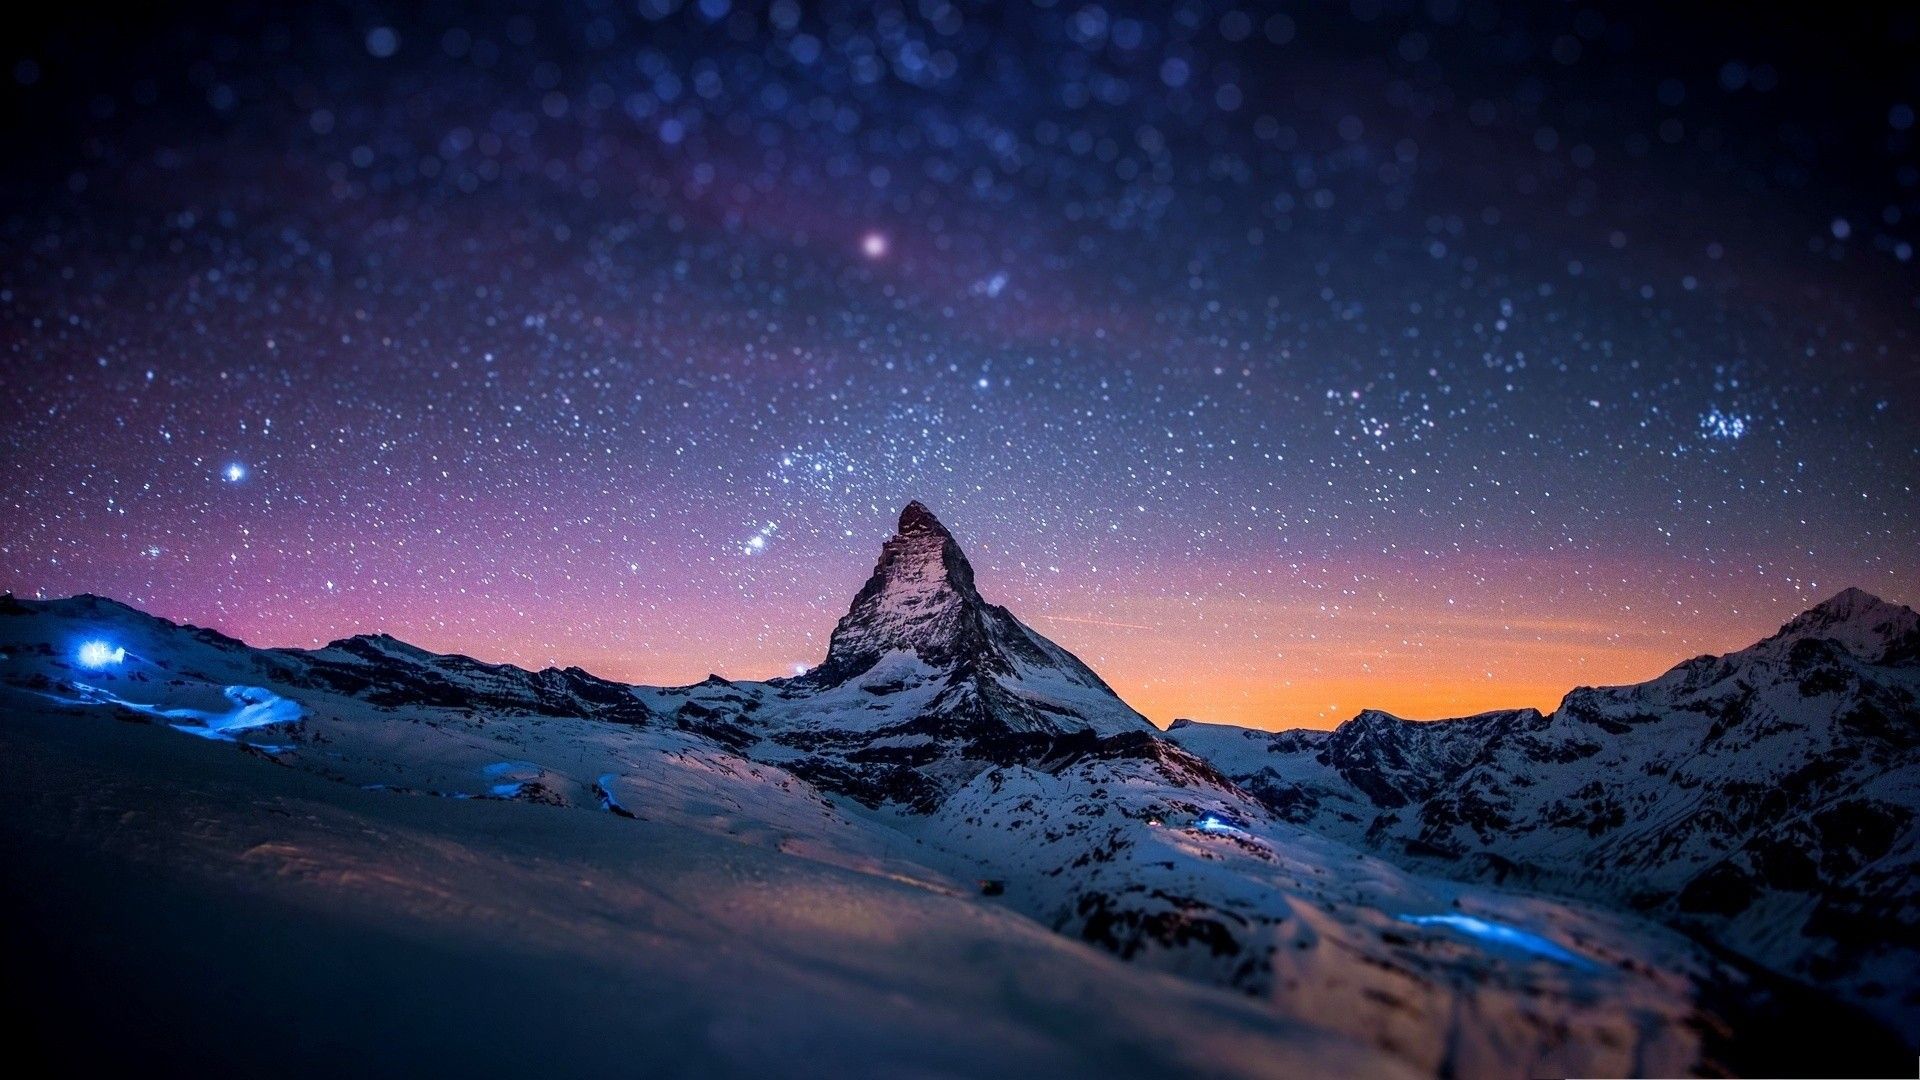 Snowy Winter Night Mountains With Snow HD Wallpaper For Deskx1080, Wallpaper13.com